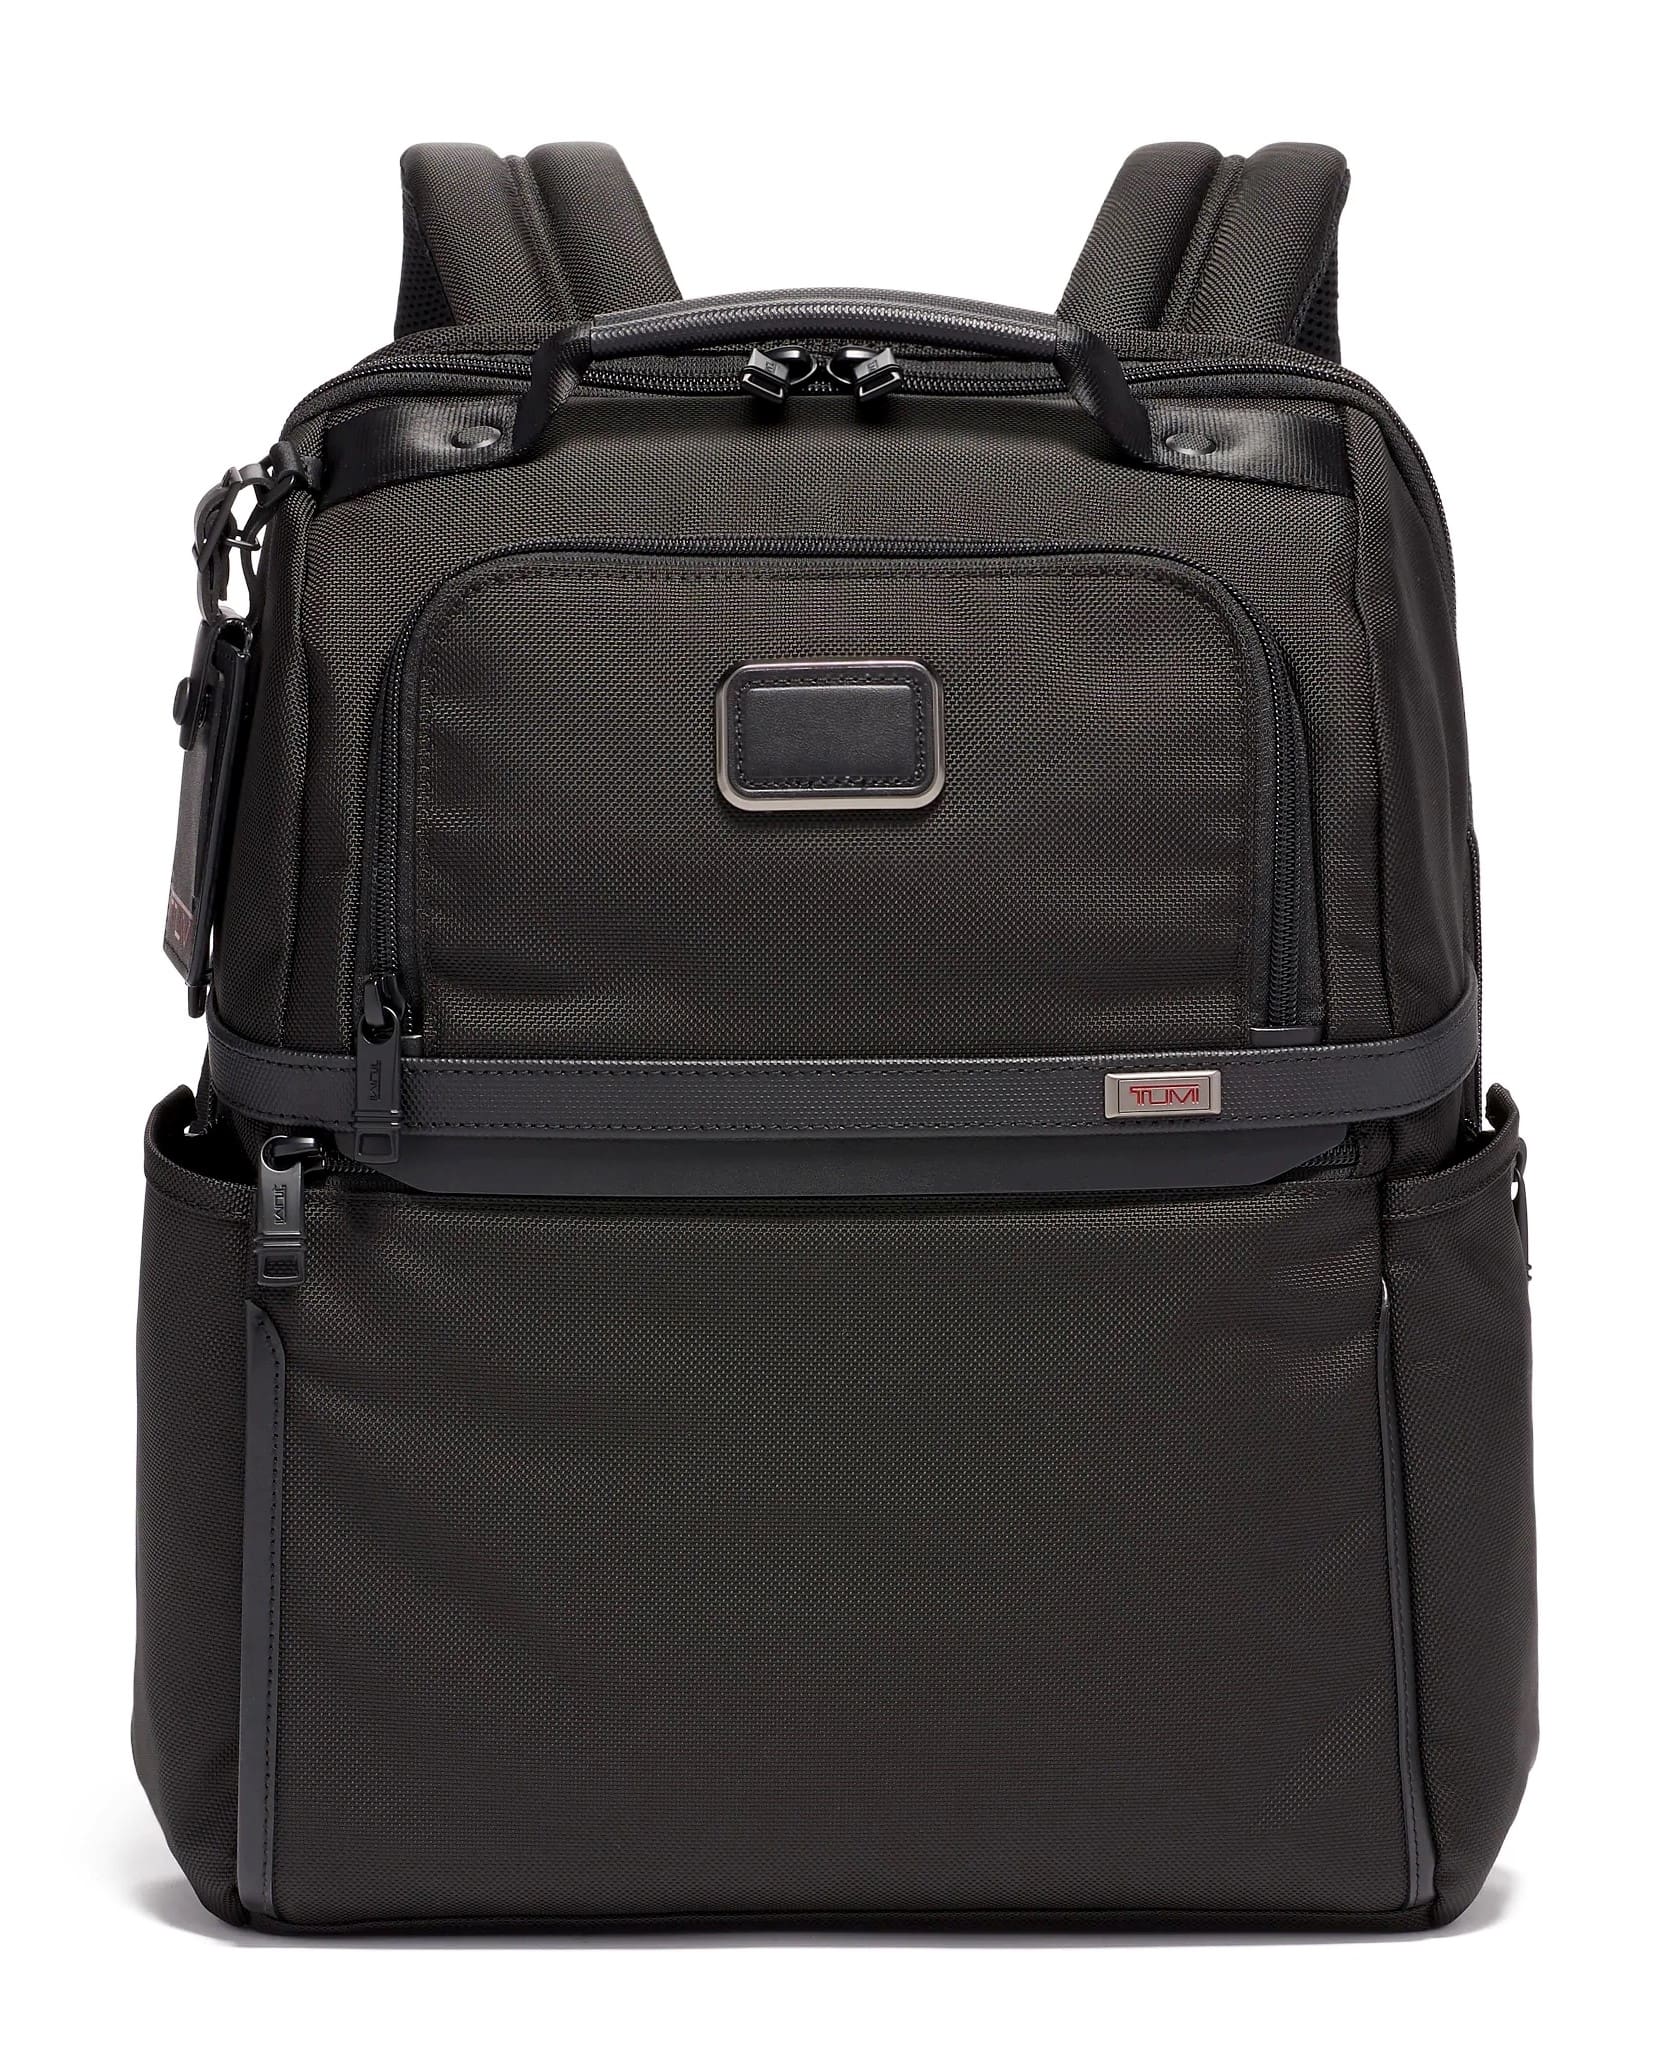 BALO UNISEX LAPTOP TUMI ALPHA SLIM SOLUTIONS BRIEF PACK BACKPACK 6